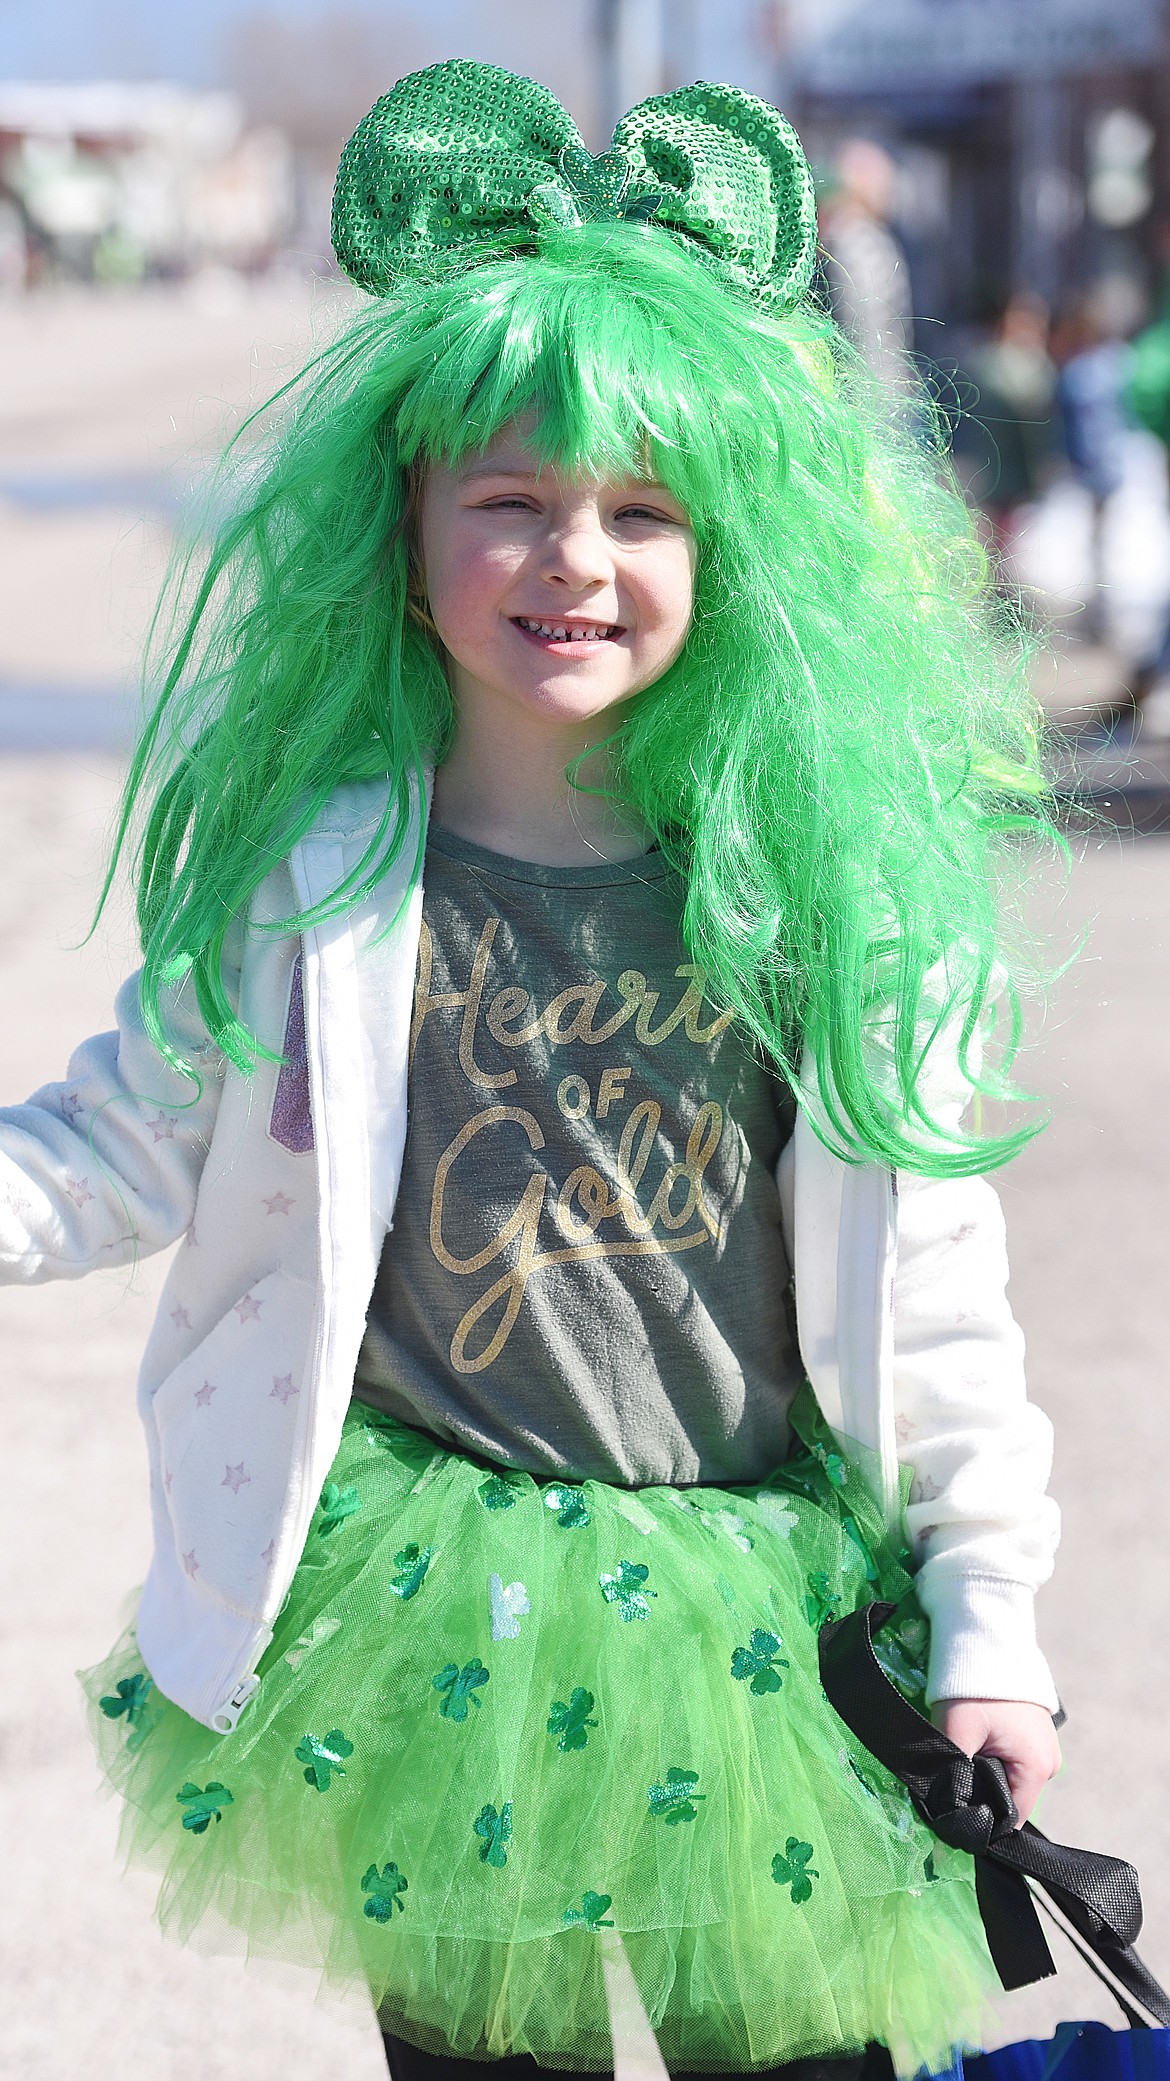 PIPER STARKEL, a 5-year-old from Polson, was dressed in her best Irish outfit to watch the TRIC St. Patrick's Day Parade on March 17.